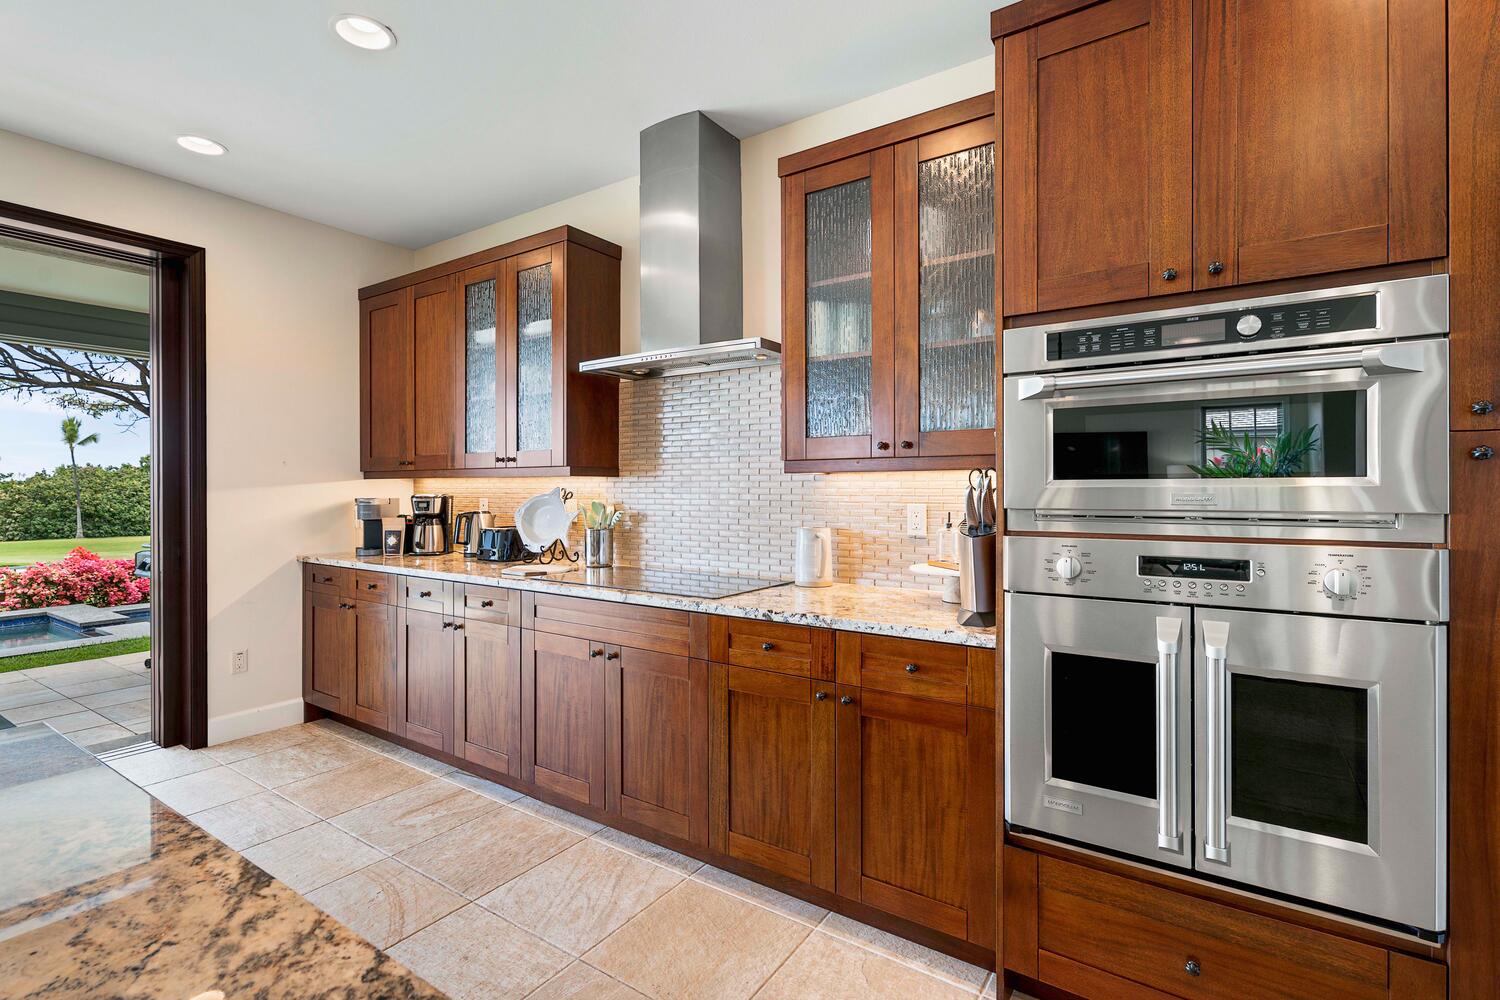 Kailua-Kona Vacation Rentals, Holua Kai #26 - Rich wooden cabinets and stainless steel appliances.